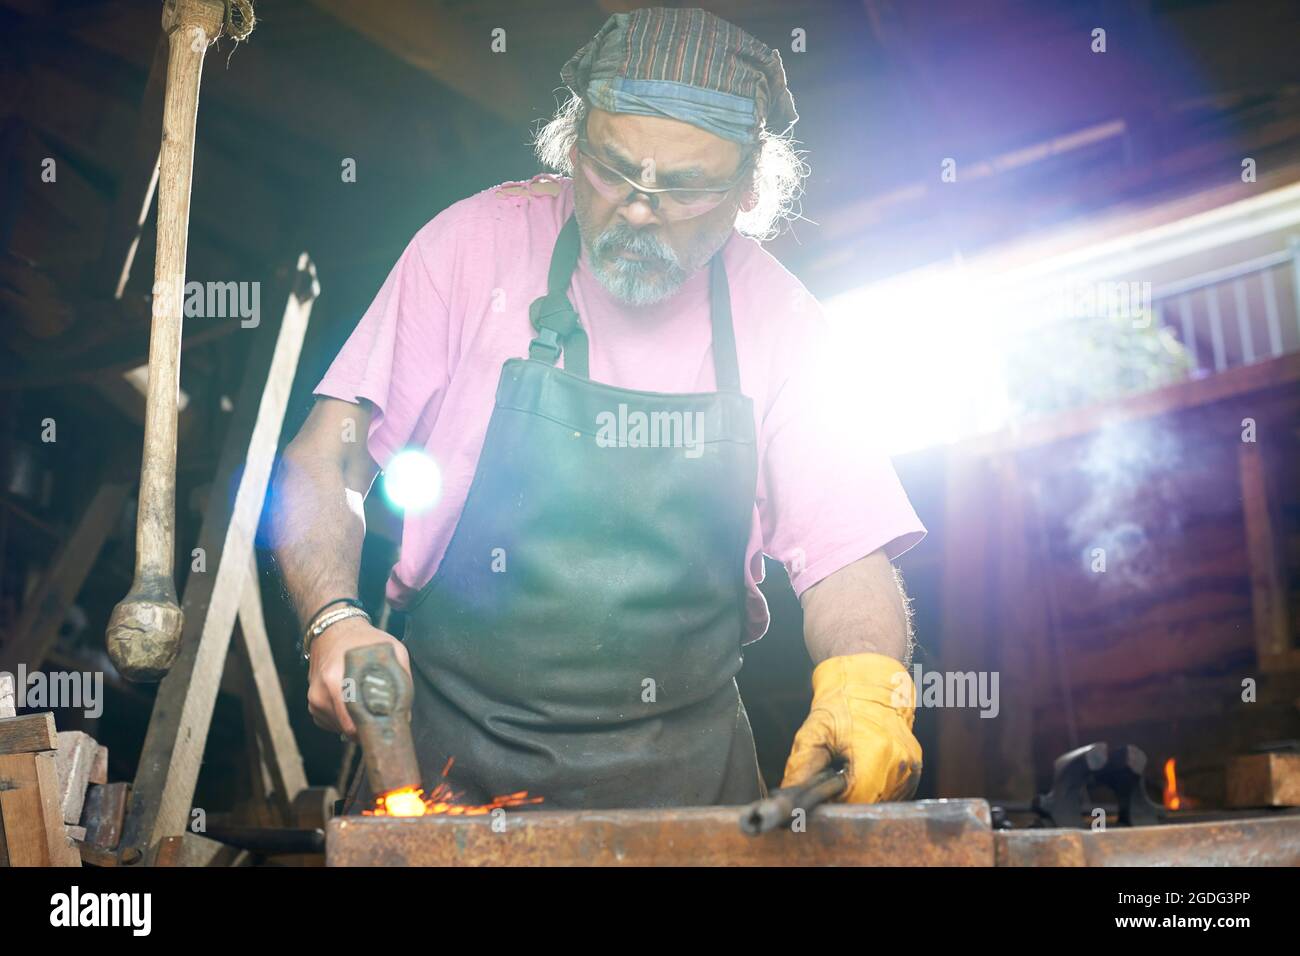 Blacksmith working in his forge Stock Photo